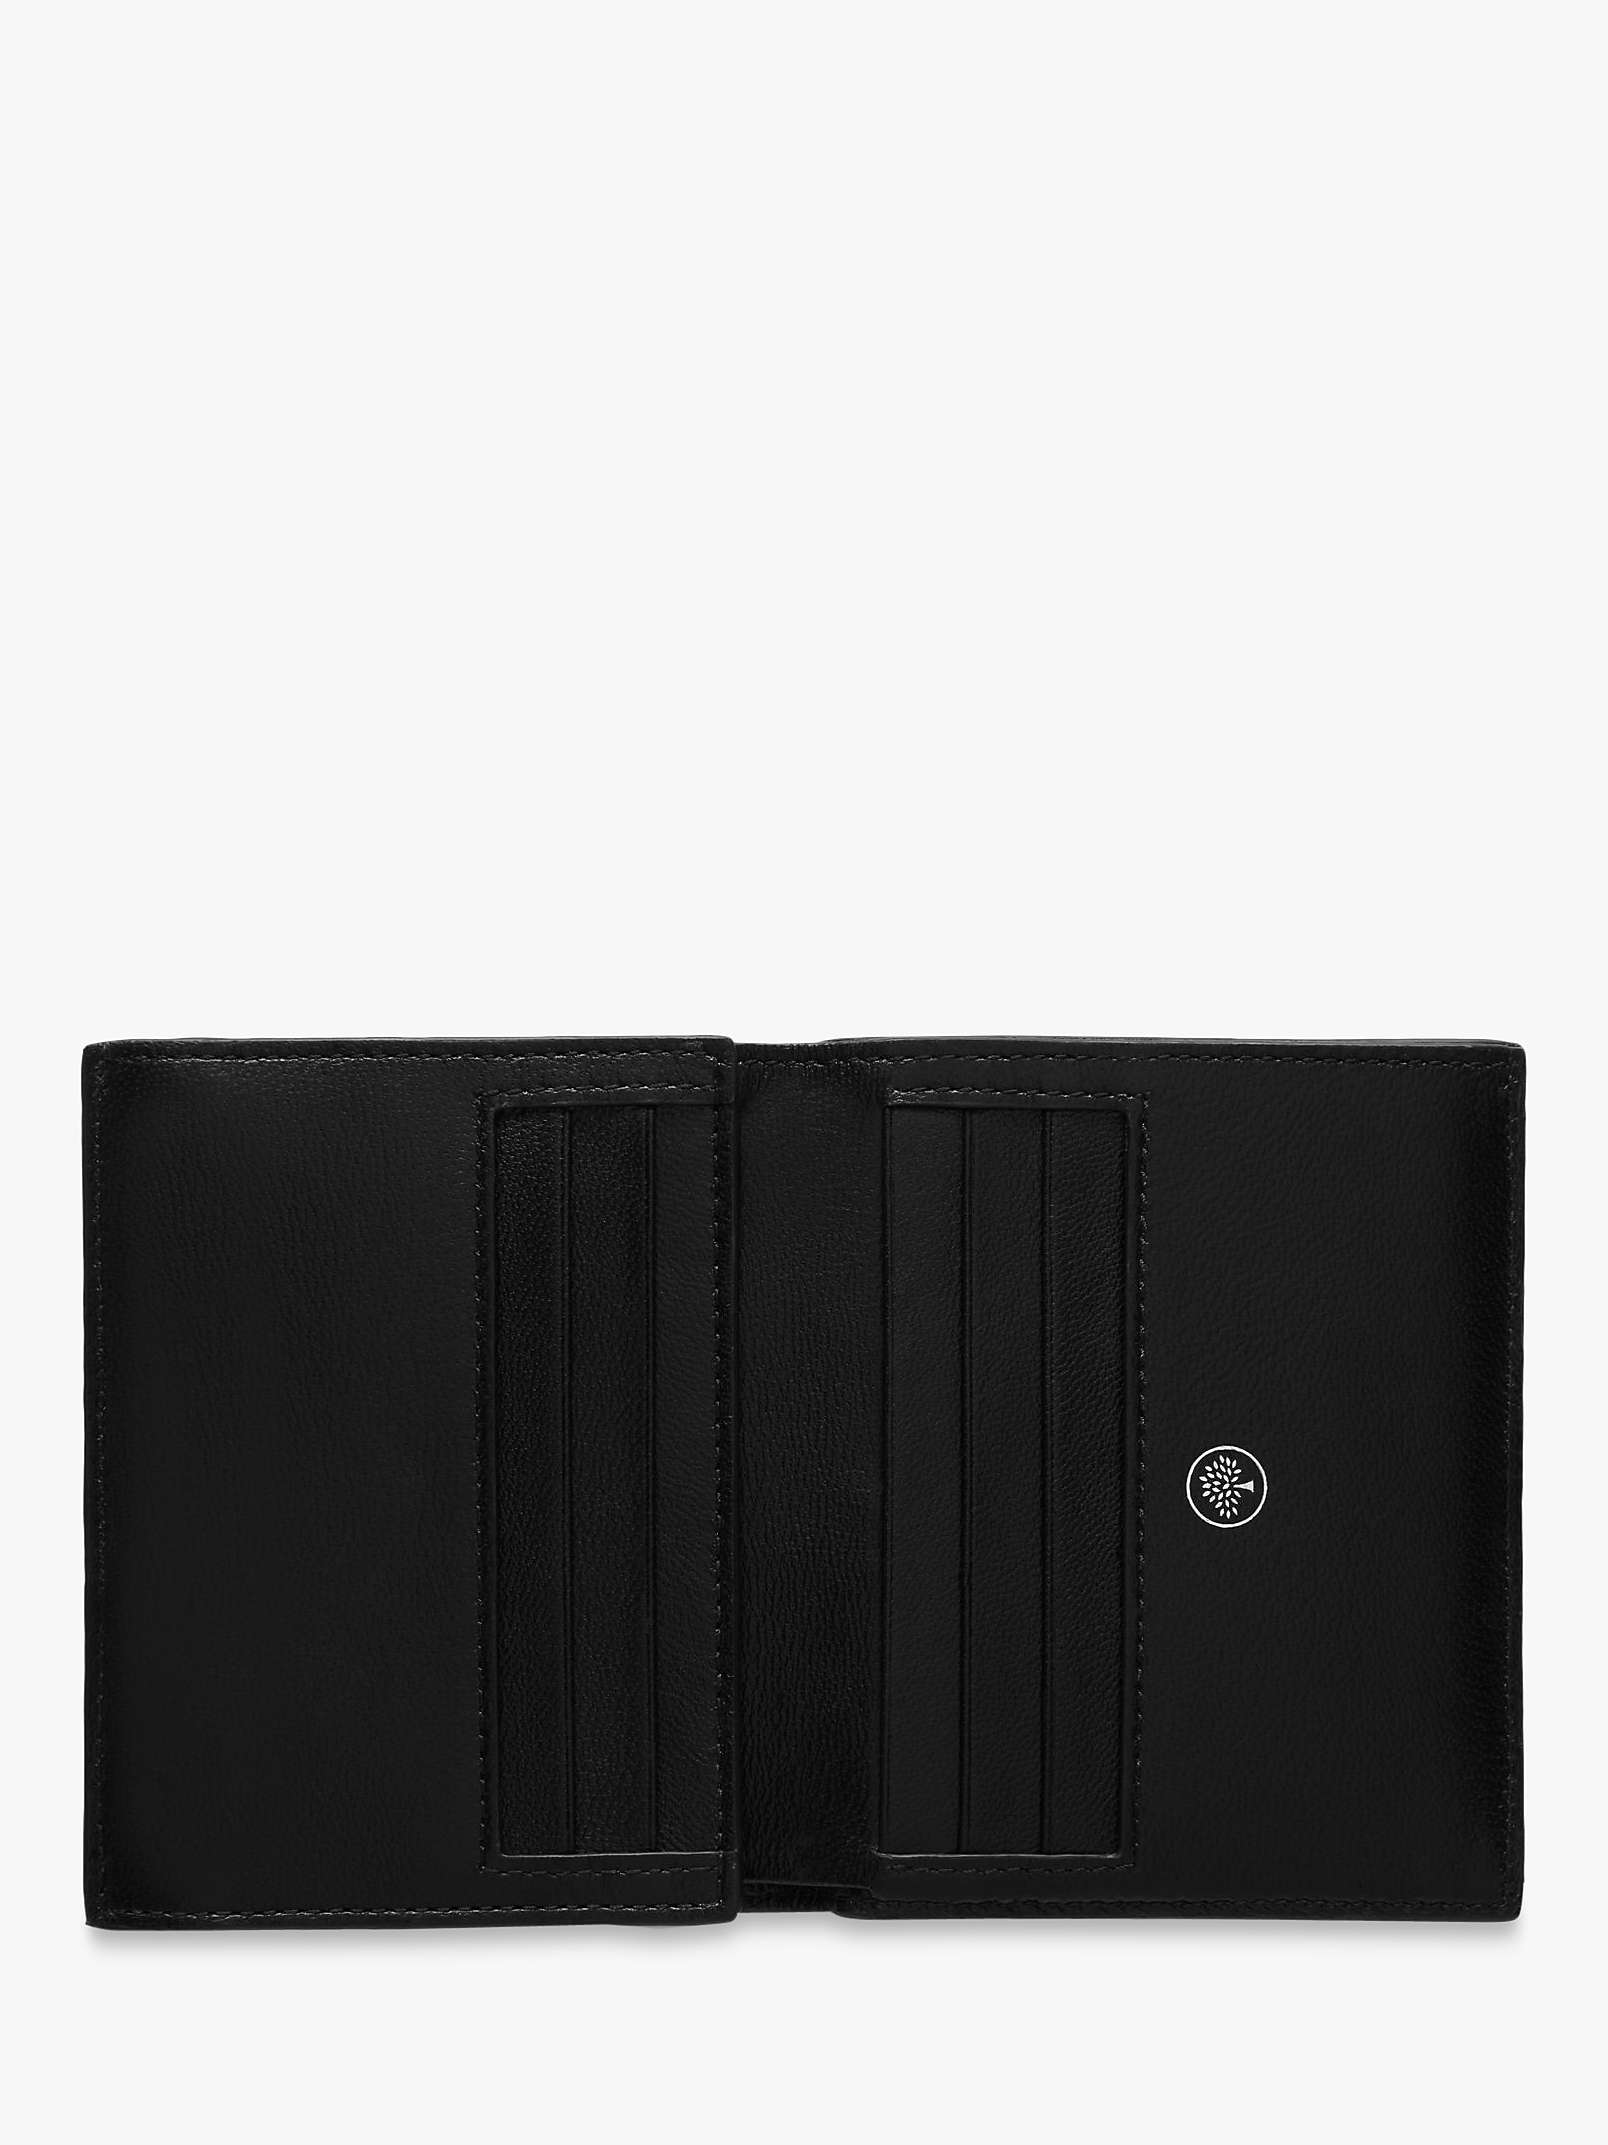 Buy Mulberry Grain Veg Tanned Leather Trifold Wallet Online at johnlewis.com